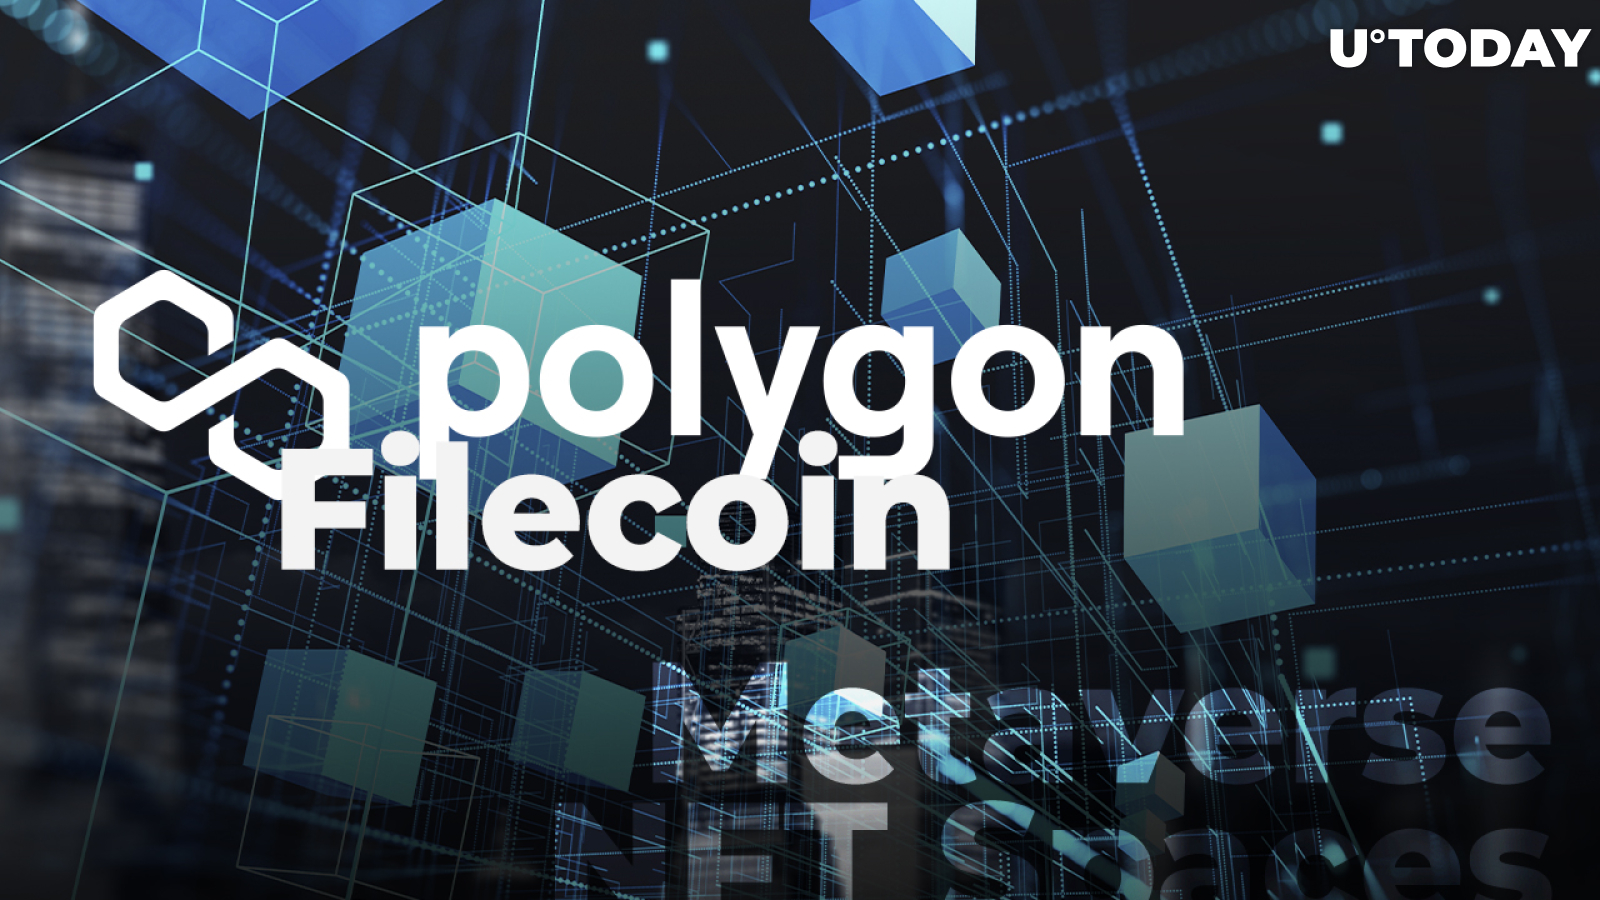 Polygon (MATIC) and Filecoin (FIL) Increase Collaboration to Integrate into Metaverse and NFT Spaces